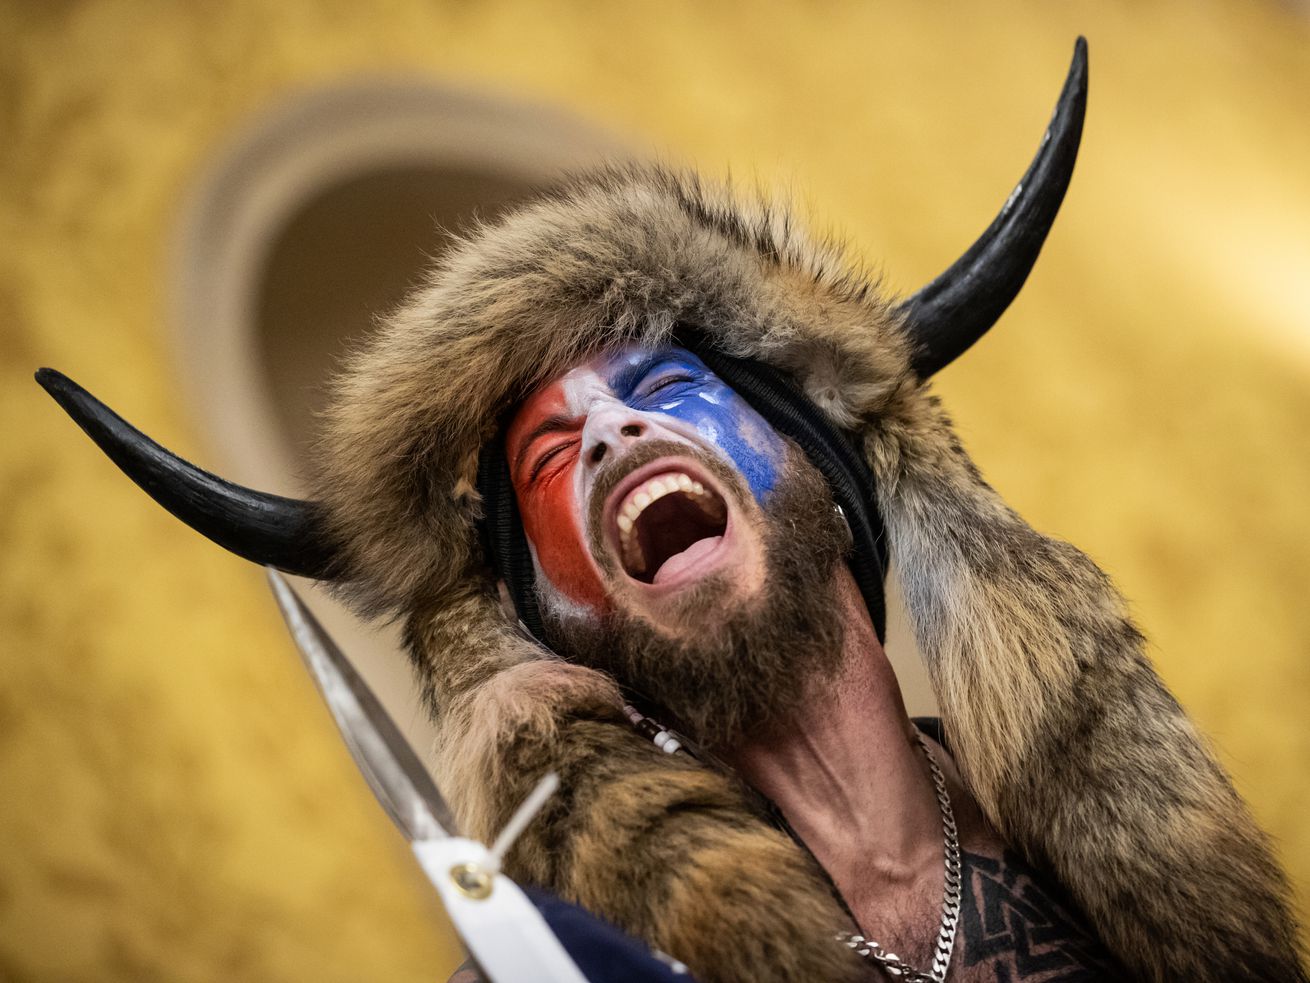 A bearded man in red, white, and blue face paint and wearing a furred and horned hat has his mouth open in a scream.